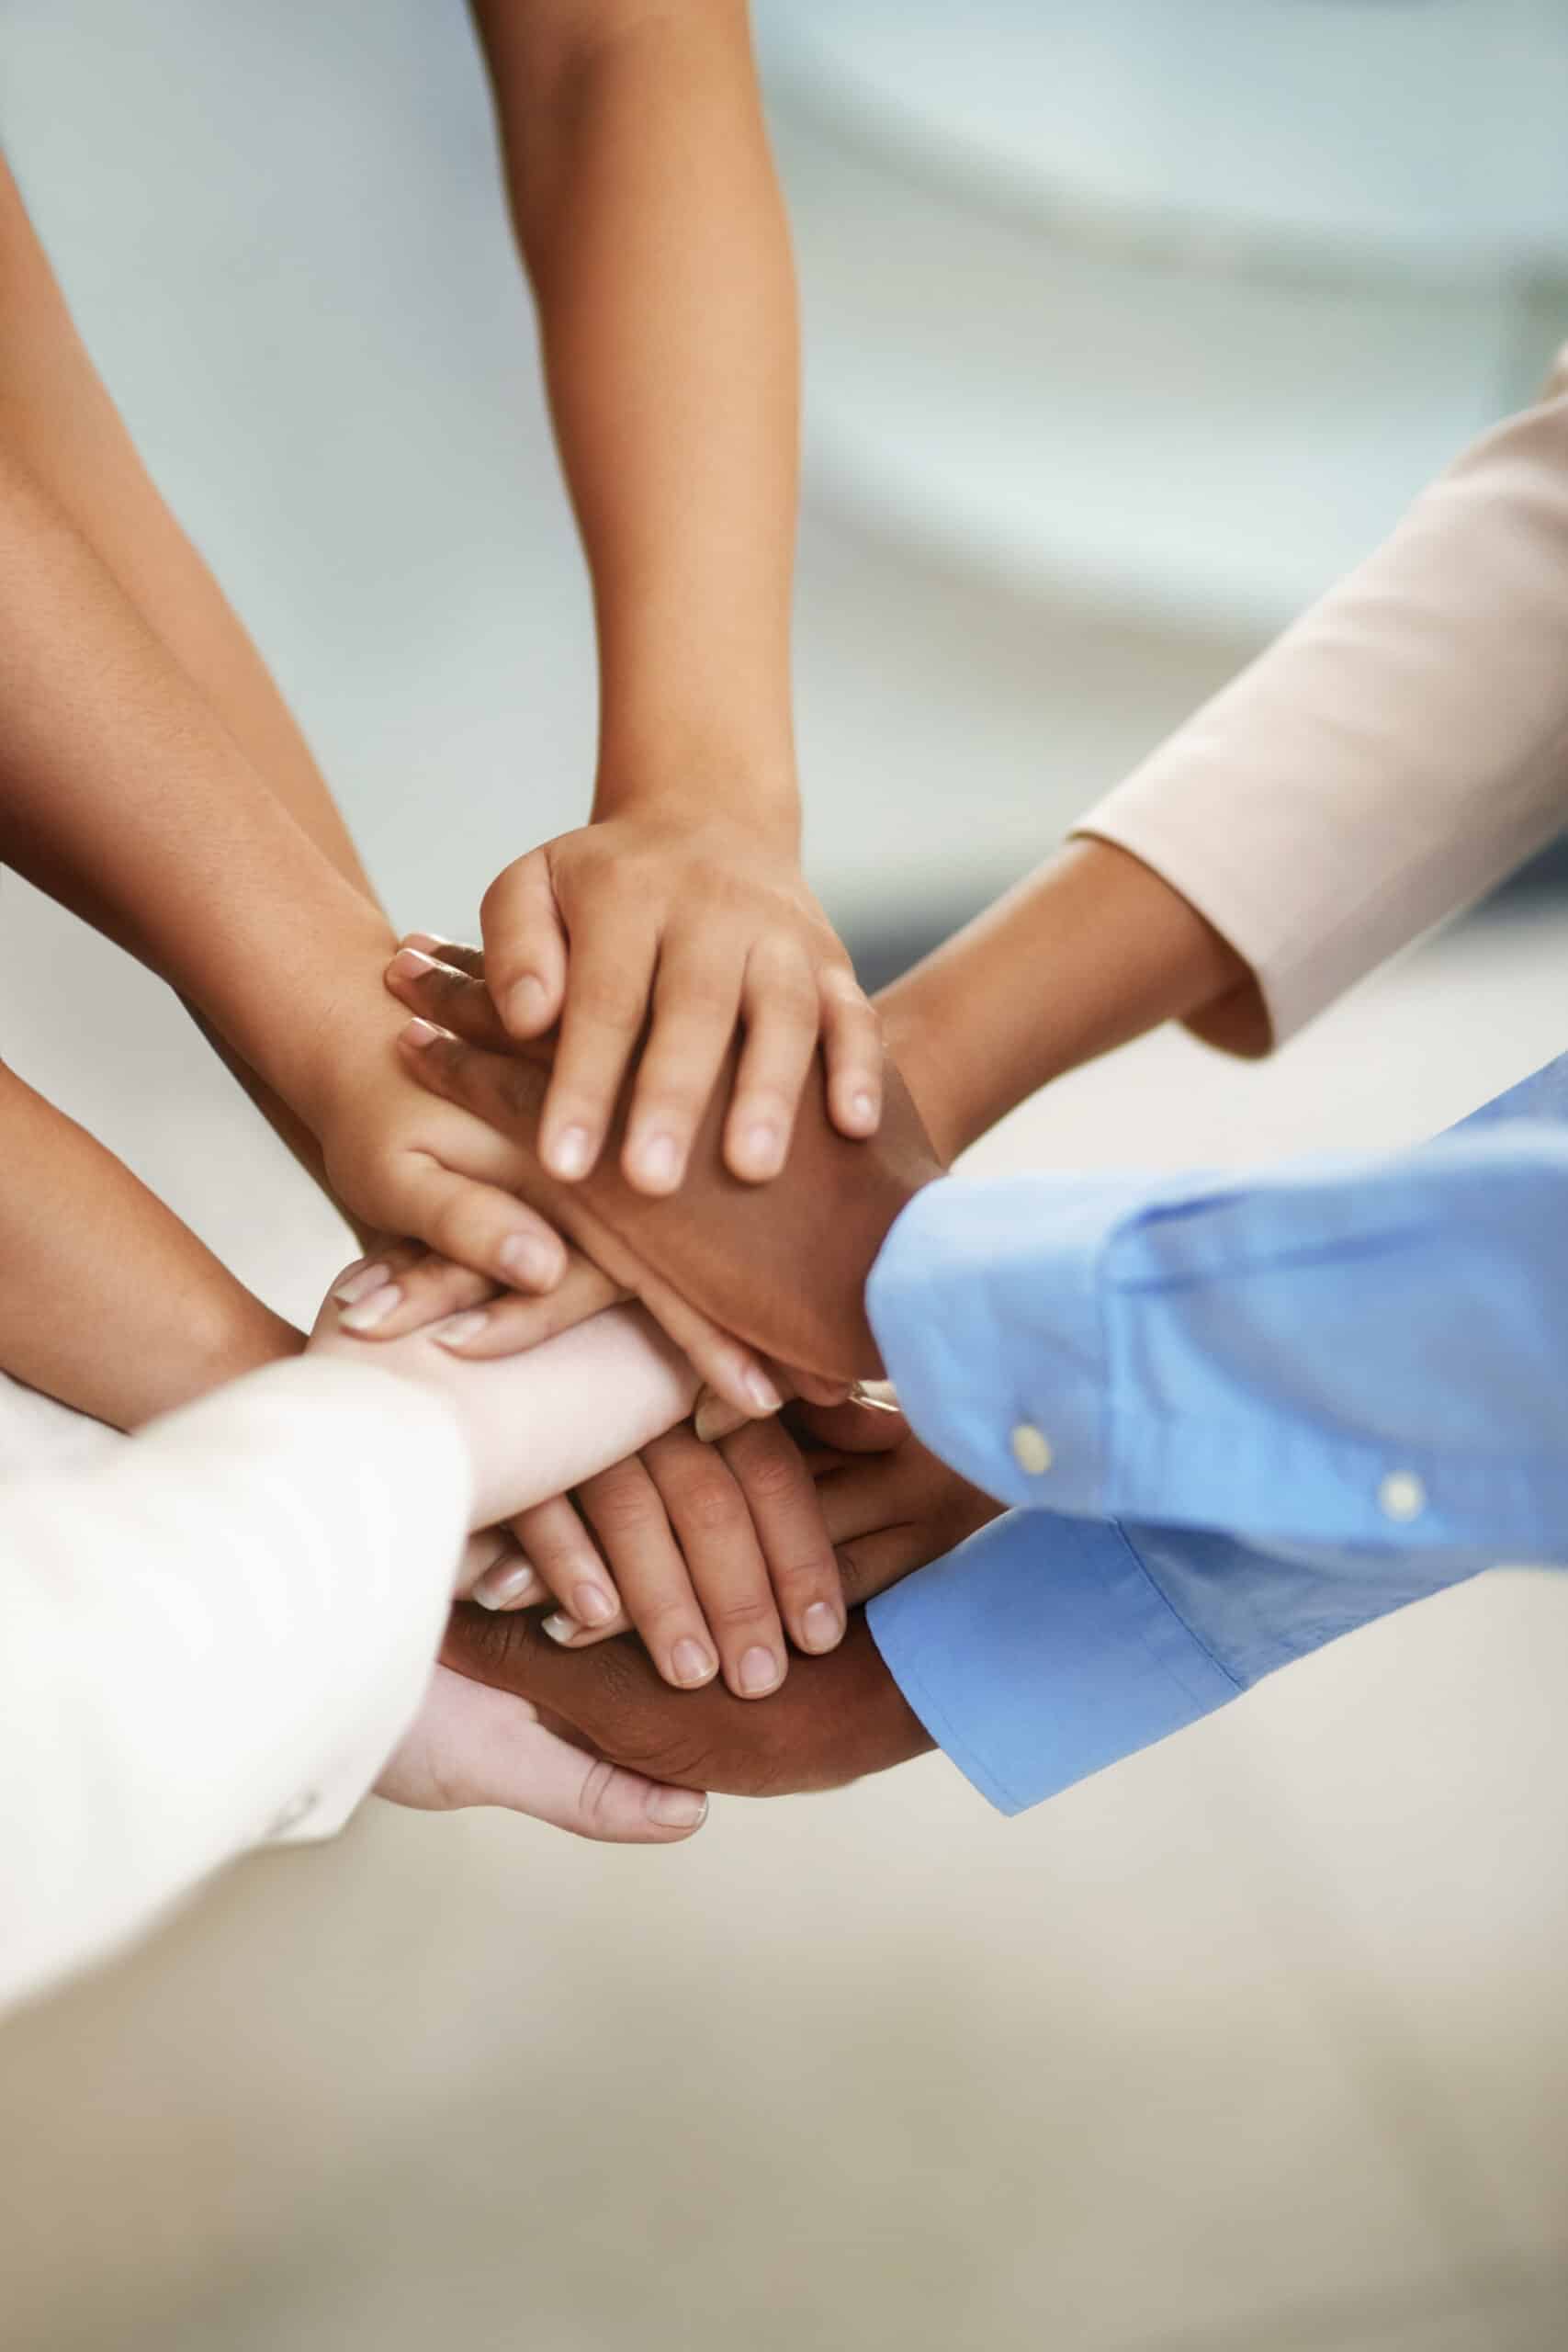 peoples hands together as a team